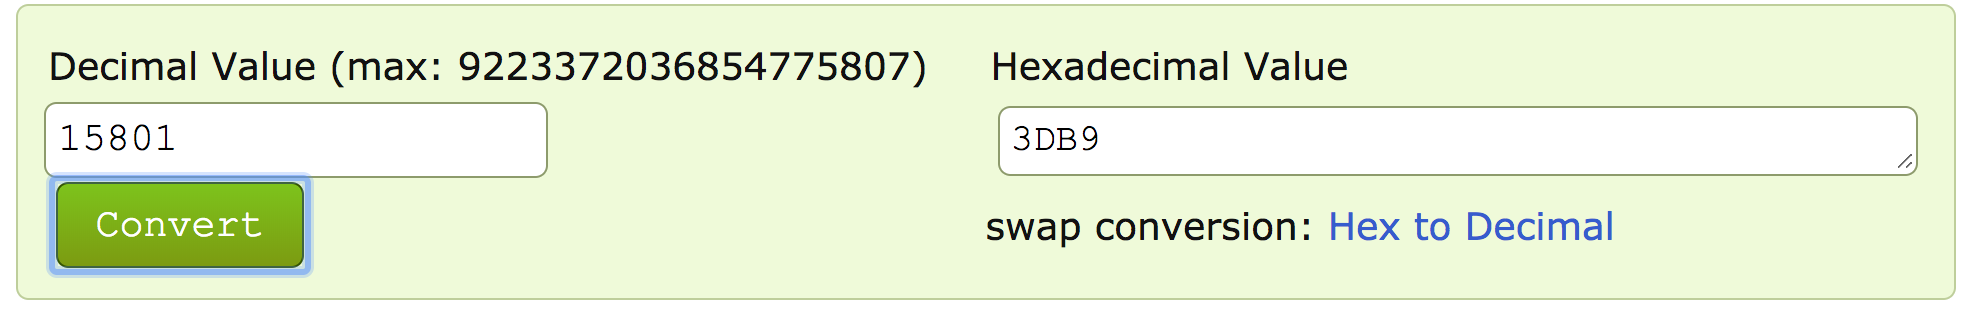 binary hex conversion of 15801 to 3DB9